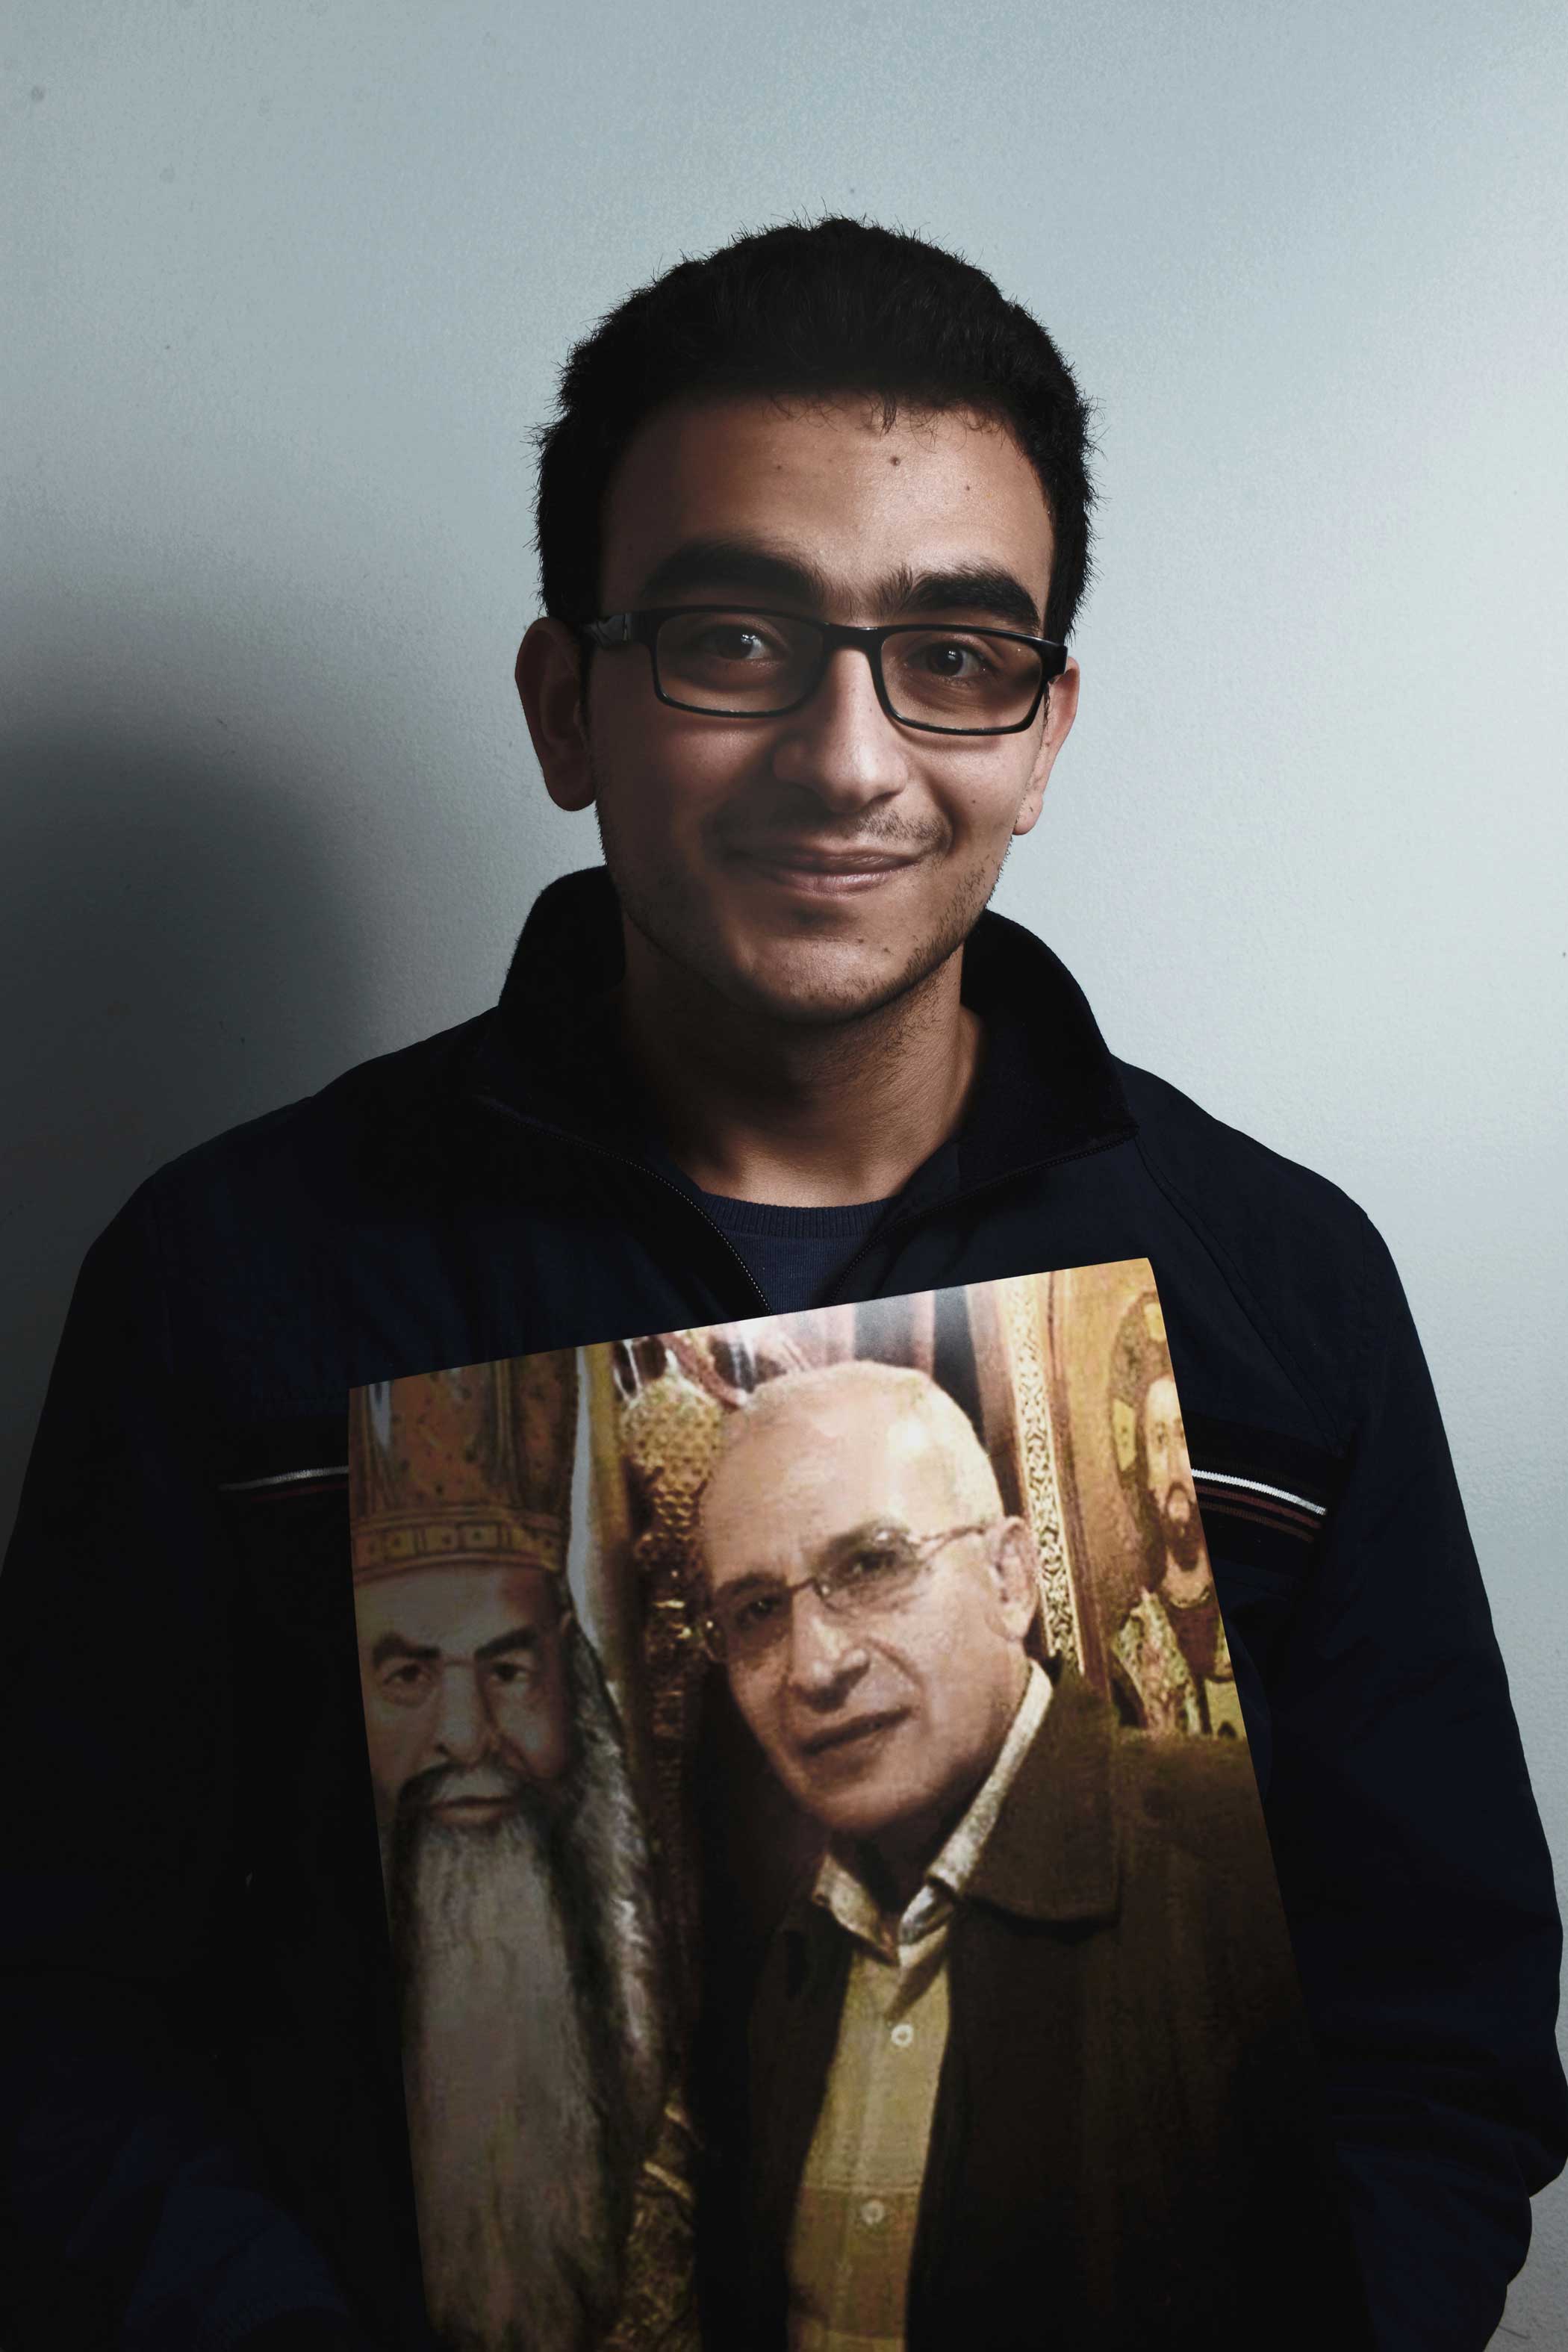 Abanoub, 22, holds a photos of his slain father, Michael Al-Almalek Mansour, 60. "I was watching the Palm Sunday service on TV and I saw the footage being cut off—hearing the screams of people. Once I saw that, I realized that my dad was dead. He always sat on the front bench during services," Abanoub said. "My dad slept next to me on bed the night before Palm Sunday. That was the last time I saw him."